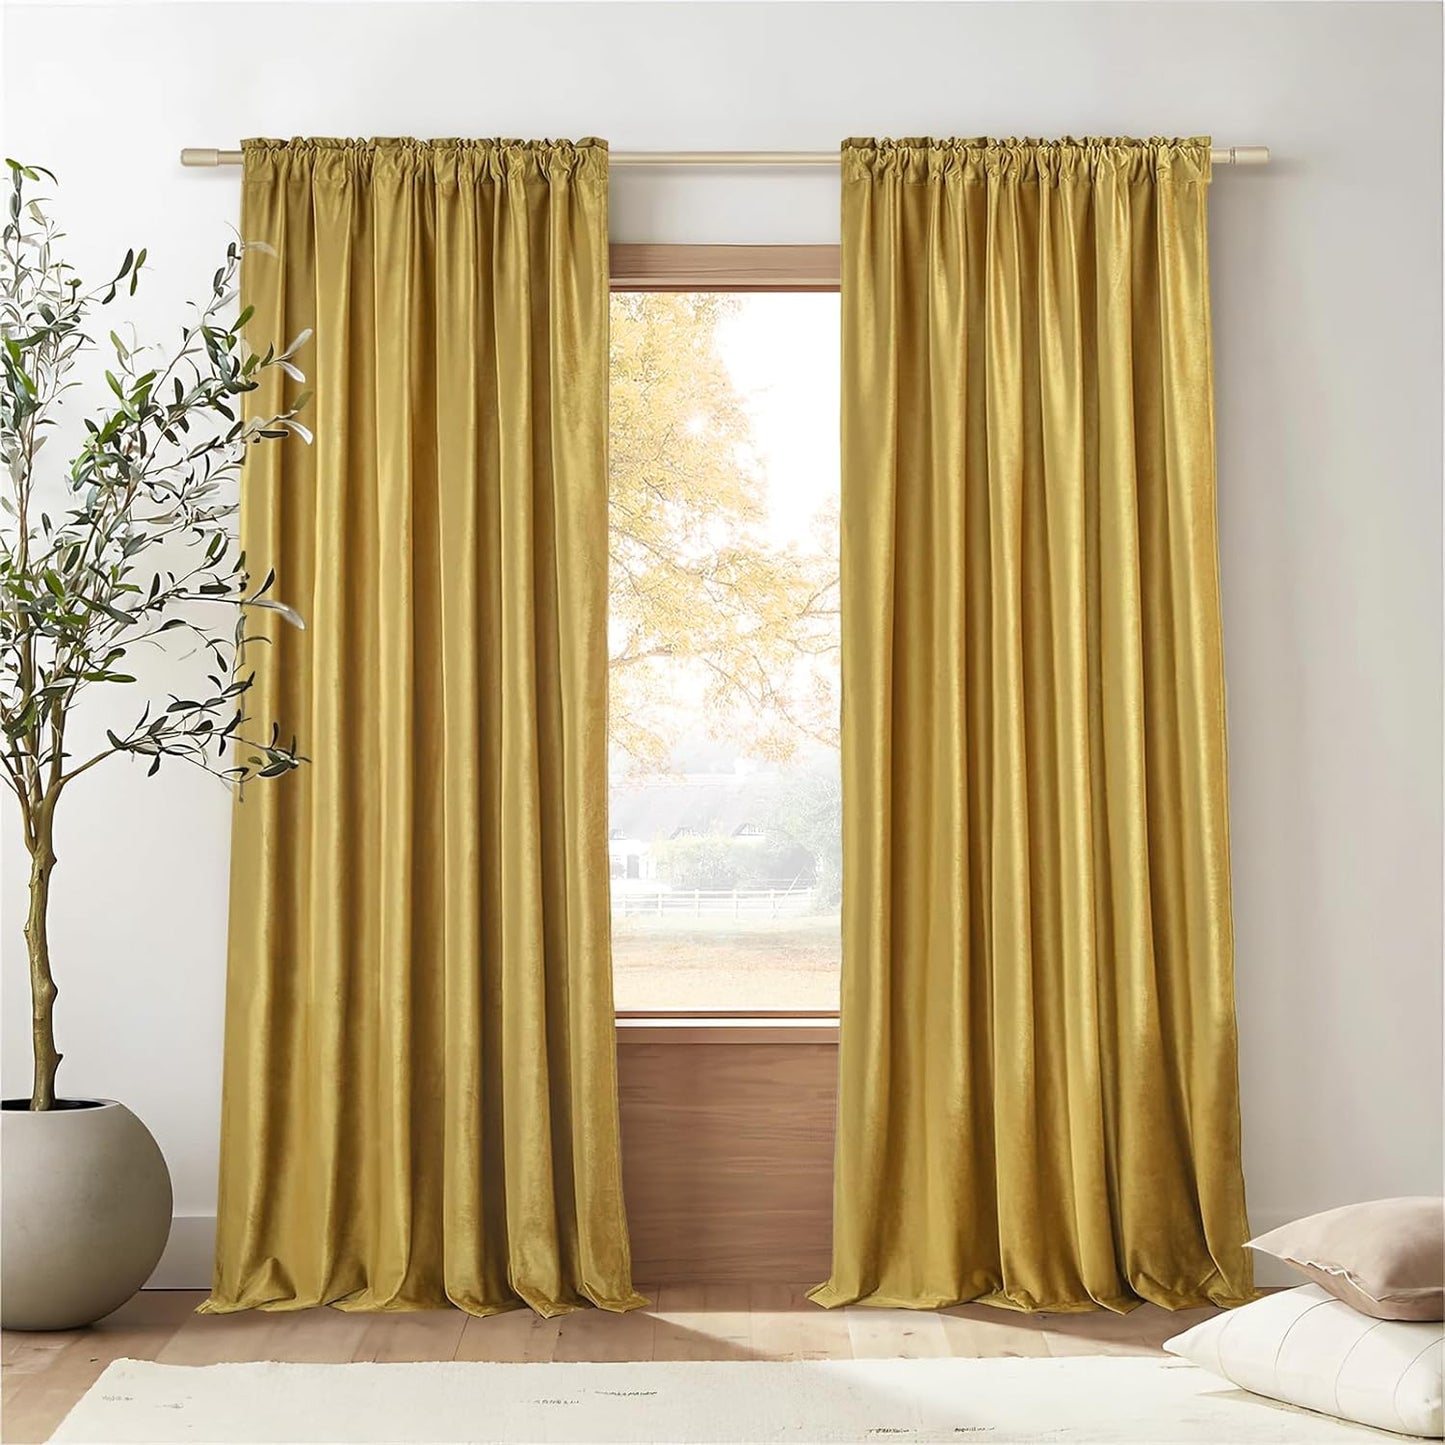 Topfinel Olive Green Velvet Curtains 84 Inches Long for Living Room,Blackout Thermal Insulated Curtains for Bedroom,Back Tab Modern Window Treatment for Living Room,52X84 Inch Length,Olive Green  Top Fine Gold Brown 52" X 90" 